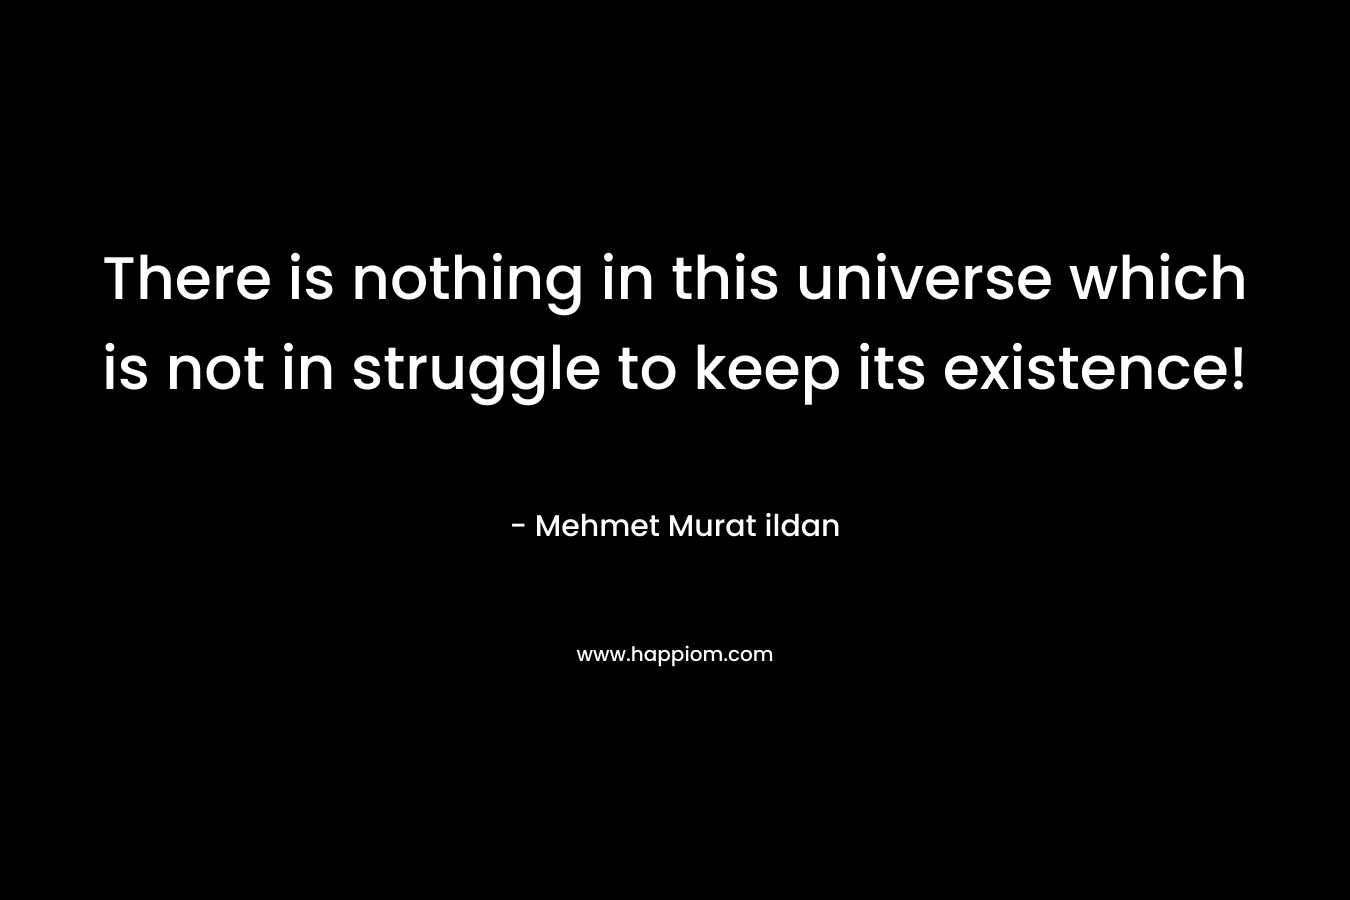 There is nothing in this universe which is not in struggle to keep its existence!